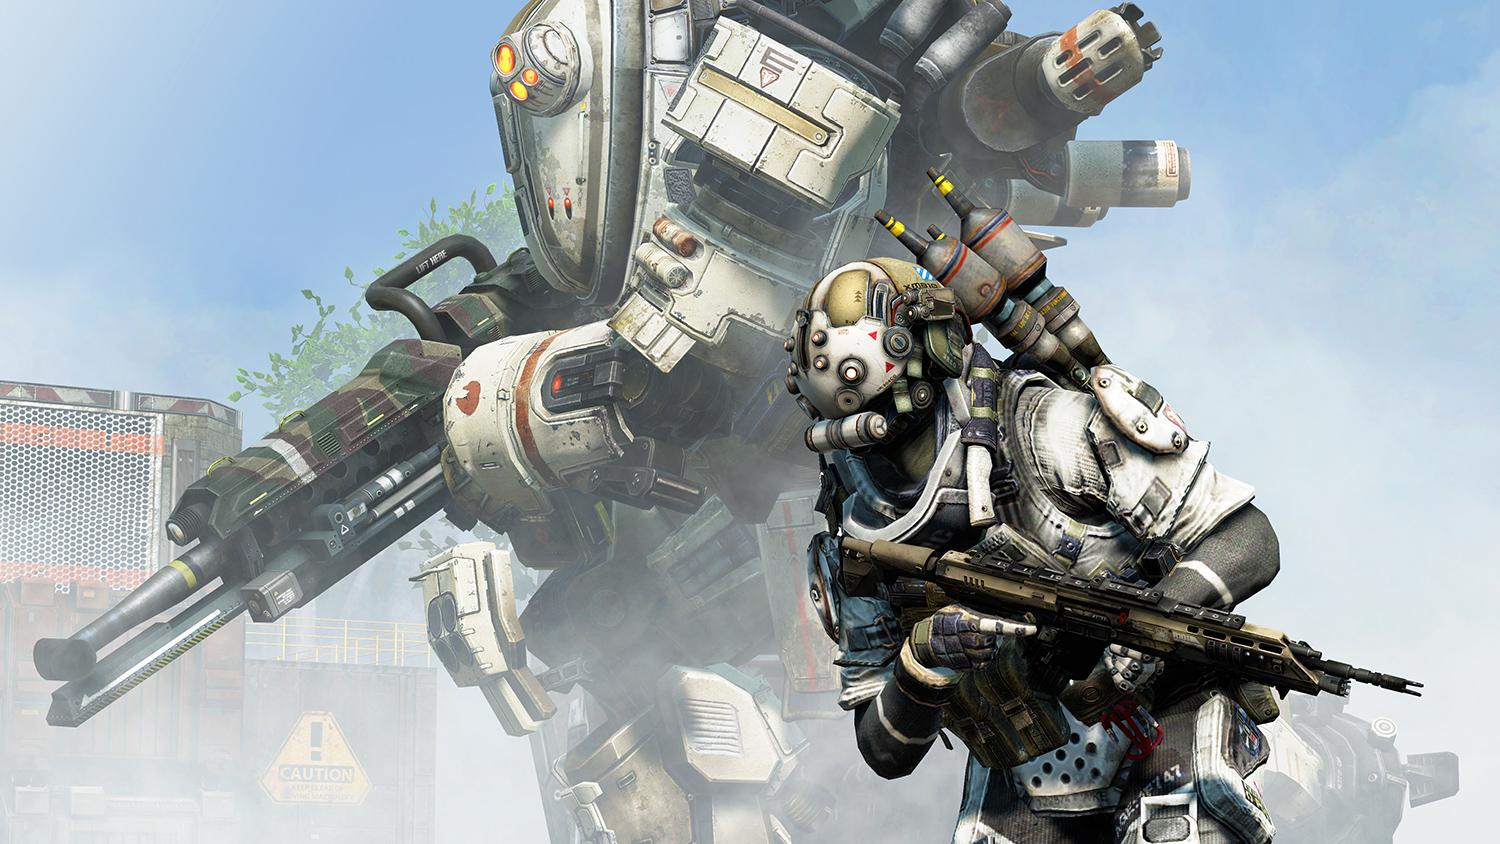 Titanfall 2 Reviews, Pros and Cons